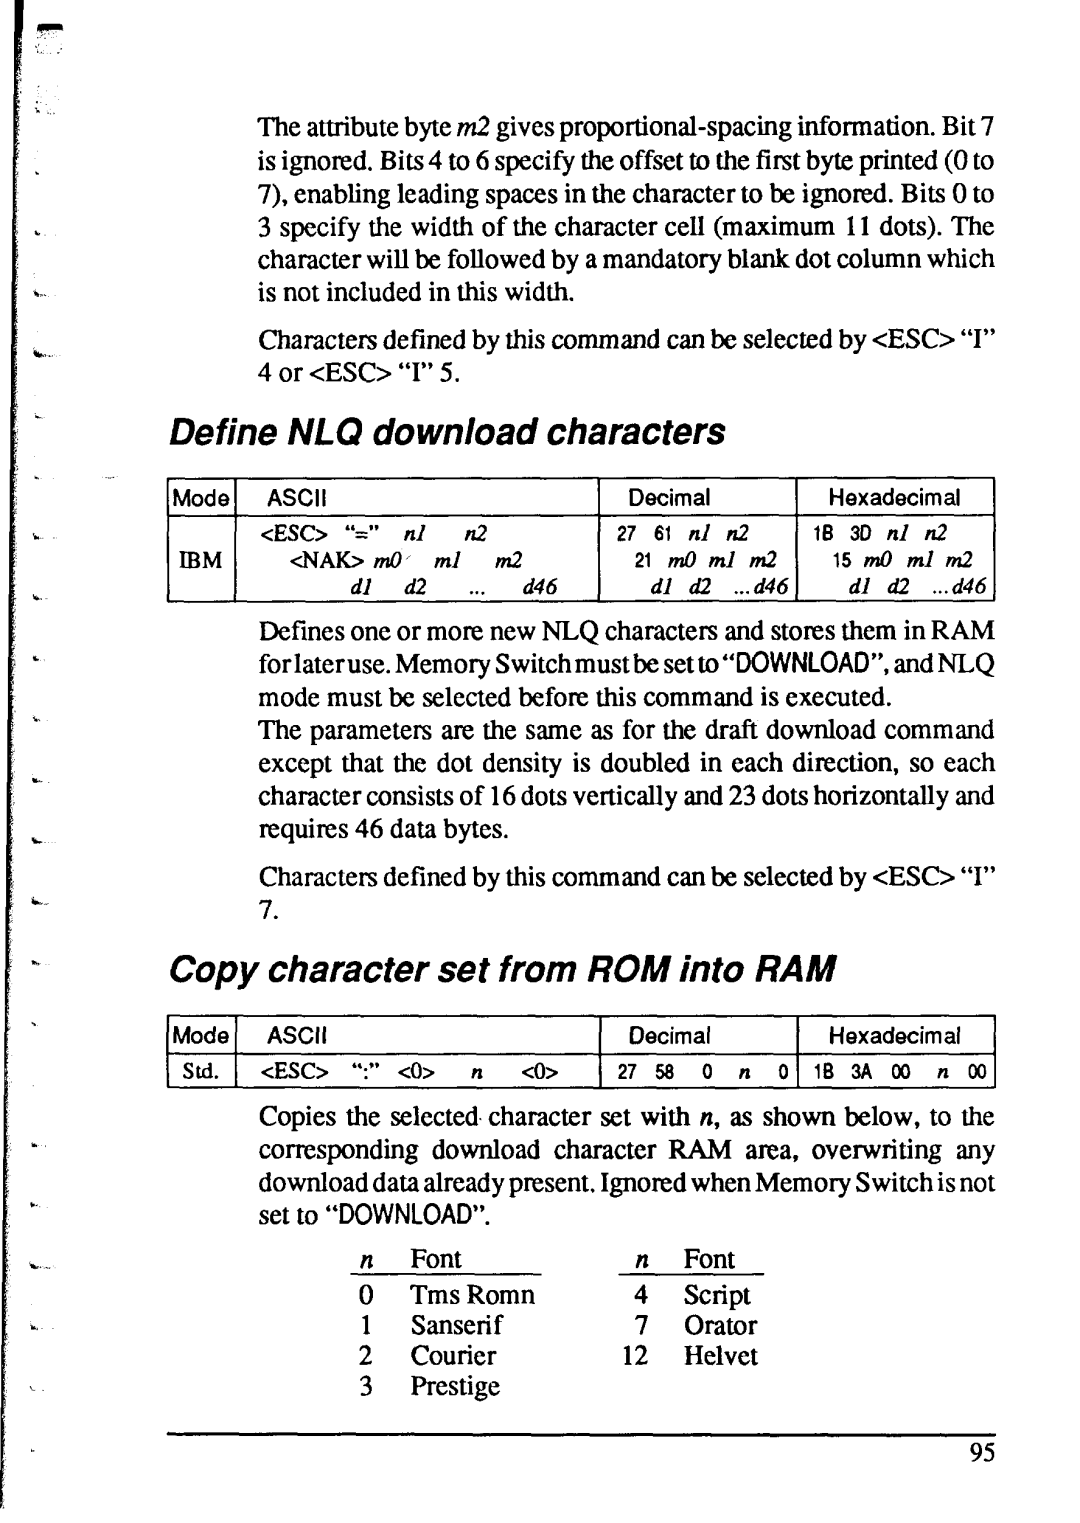 Star Micronics XR-1520, XR-1020 Copy character set from ROM into RAM, Define NLQ download characters, set to “DOWNLOAD” 